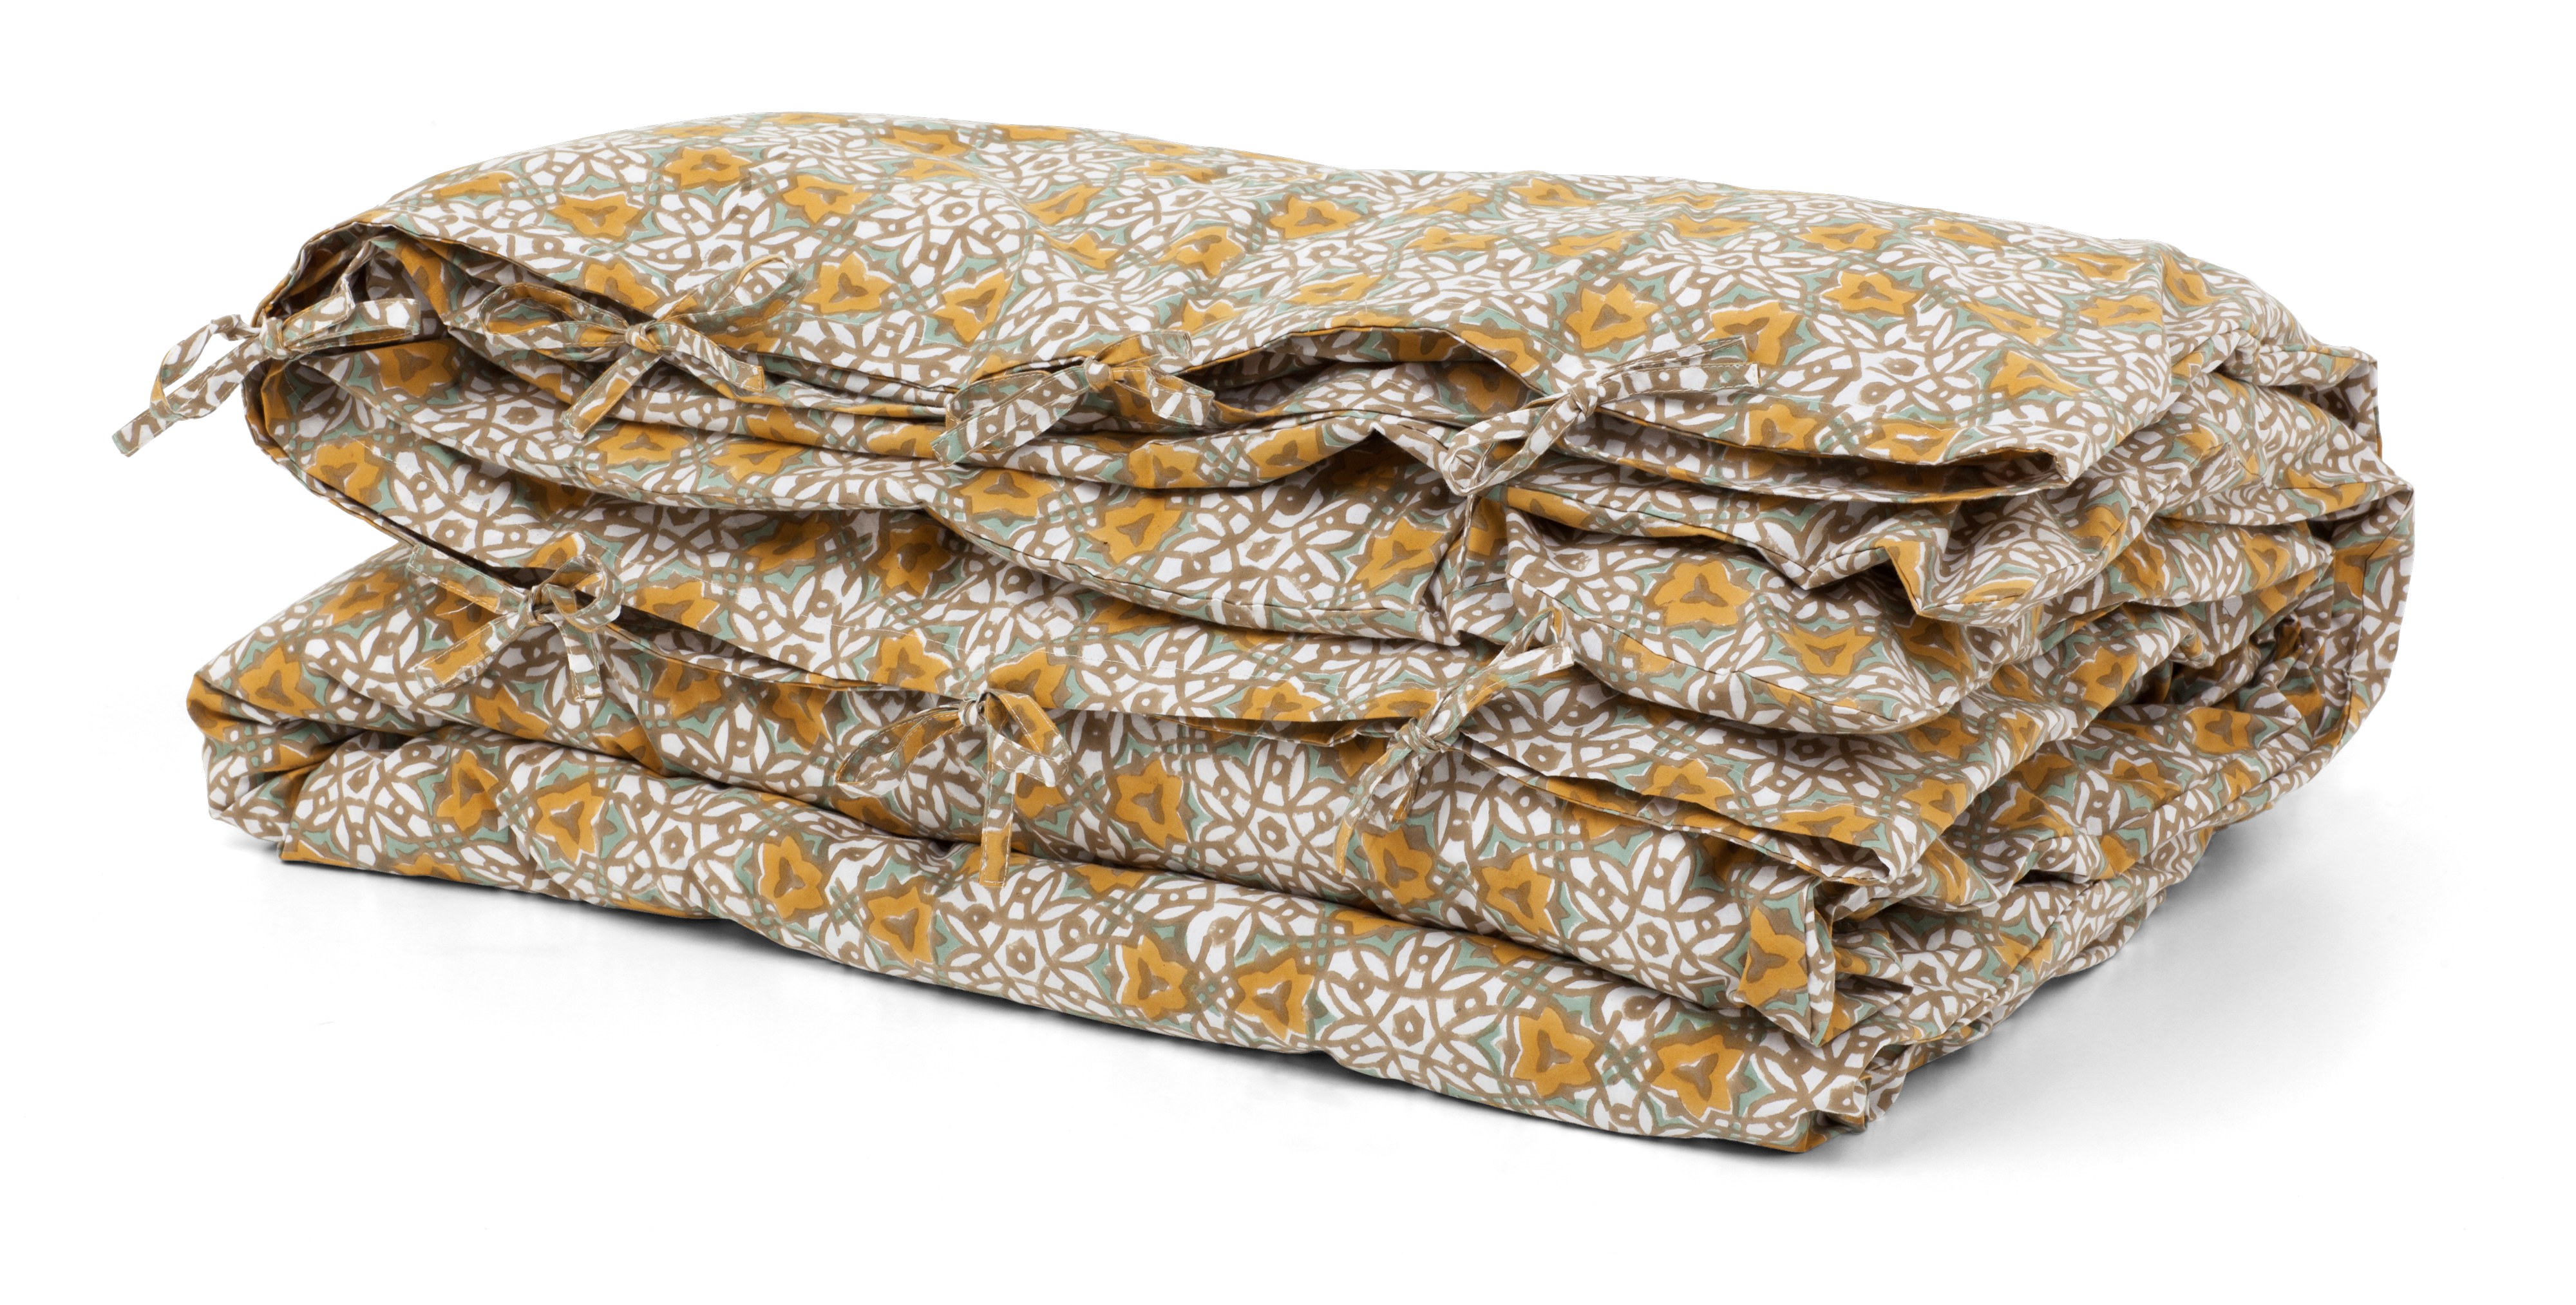 Duvet Cover with City Palace print in Ochre